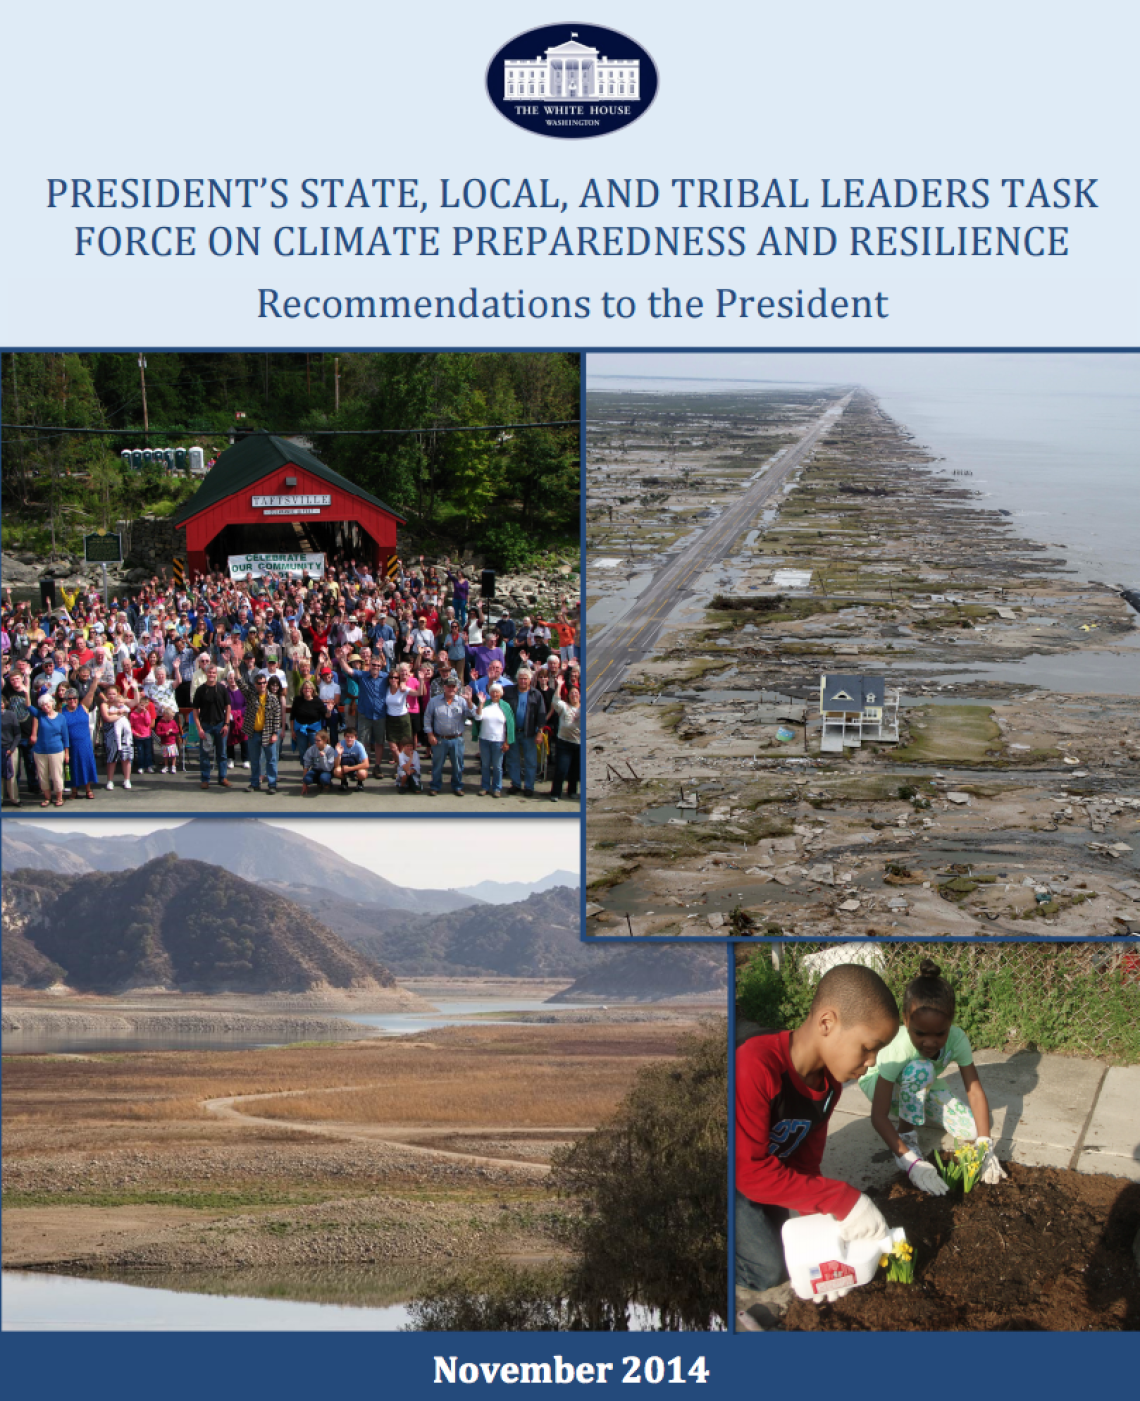 President's State, Local, and Tribal Leaders Task Force on Climate Preparedness and Resilience: Recommendations to the President